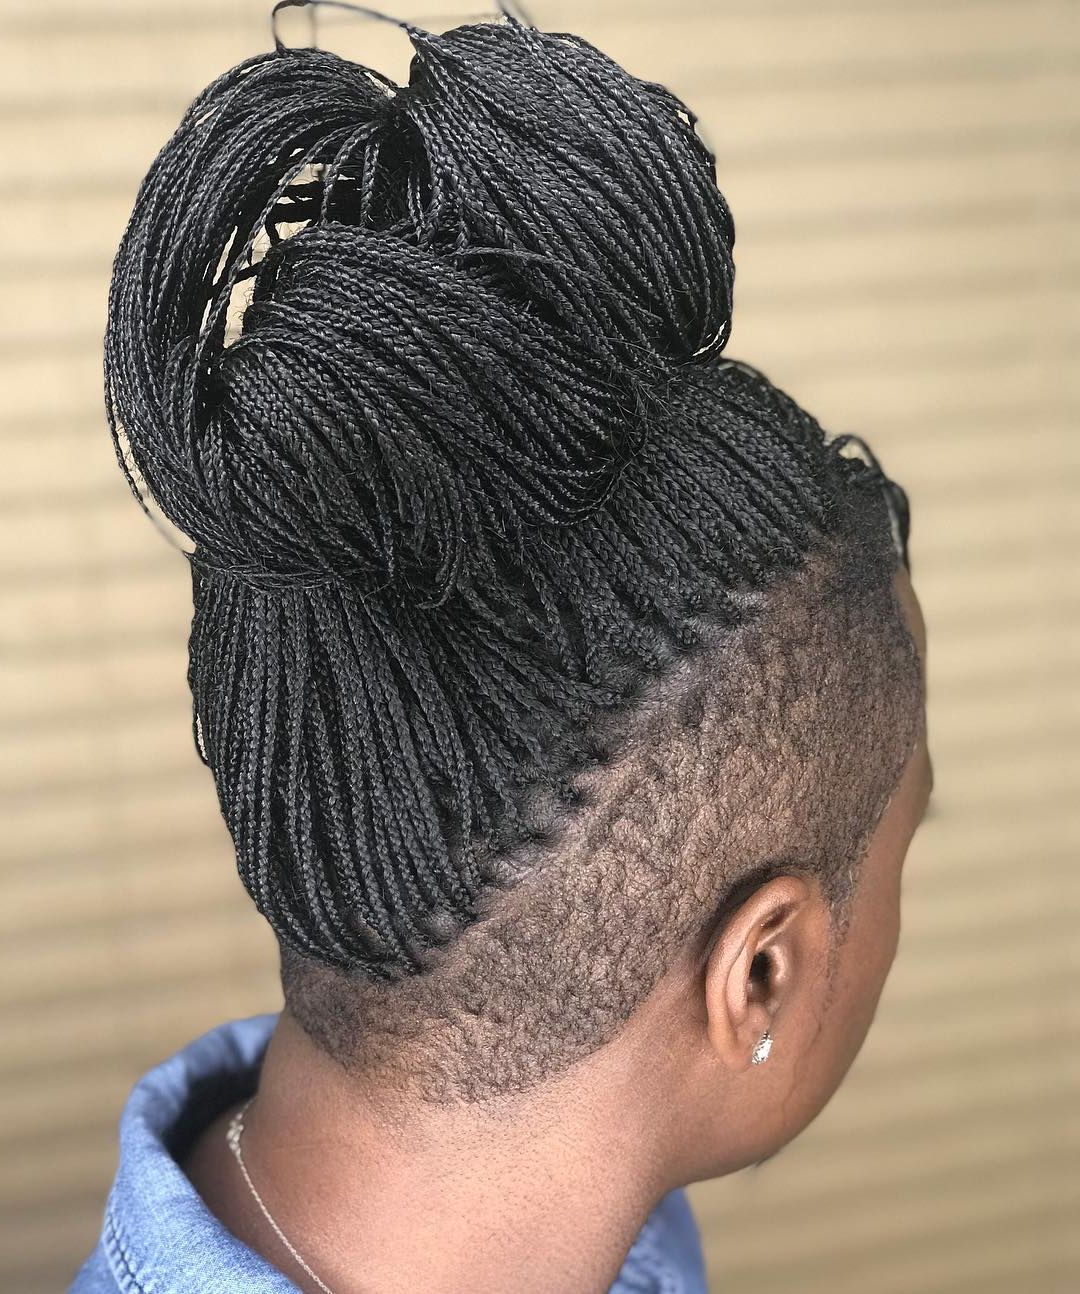 Preferred Skinny Yarn Braid Hairstyles In A Half Updo Regarding 20 Superb Braids With Shaved Sides Worth Copying (View 5 of 20)